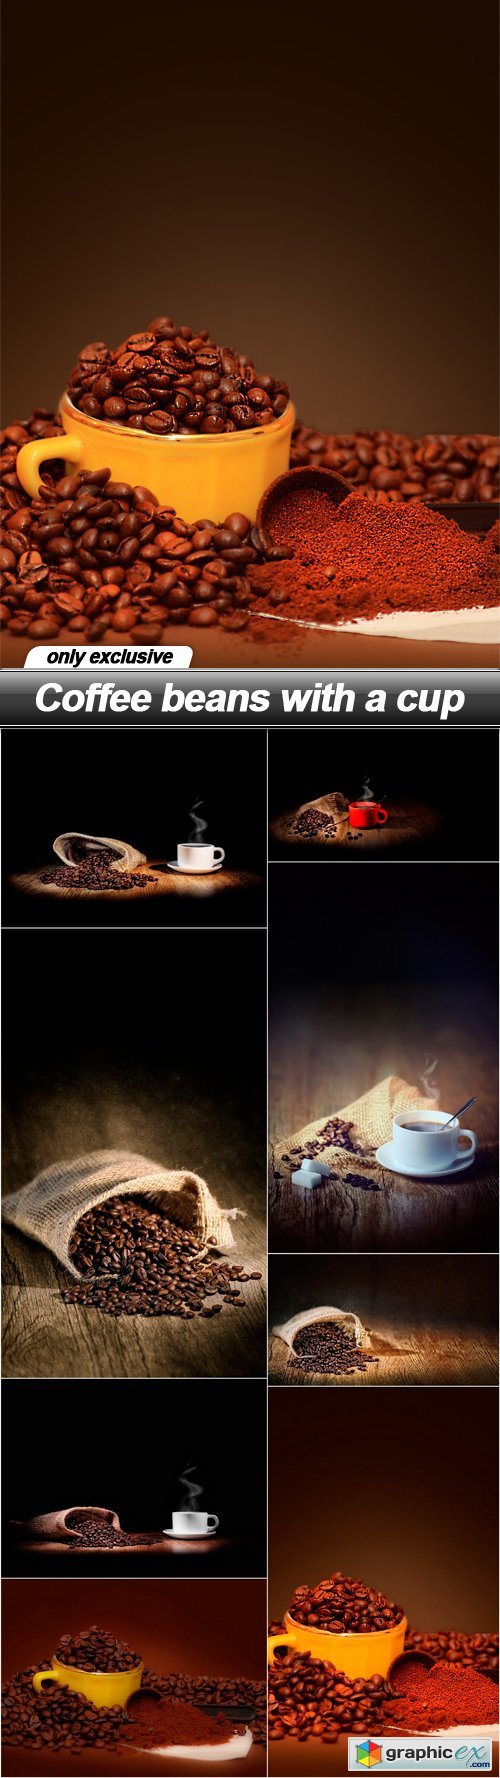 Coffee beans with a cup - 8 UHQ JPEG